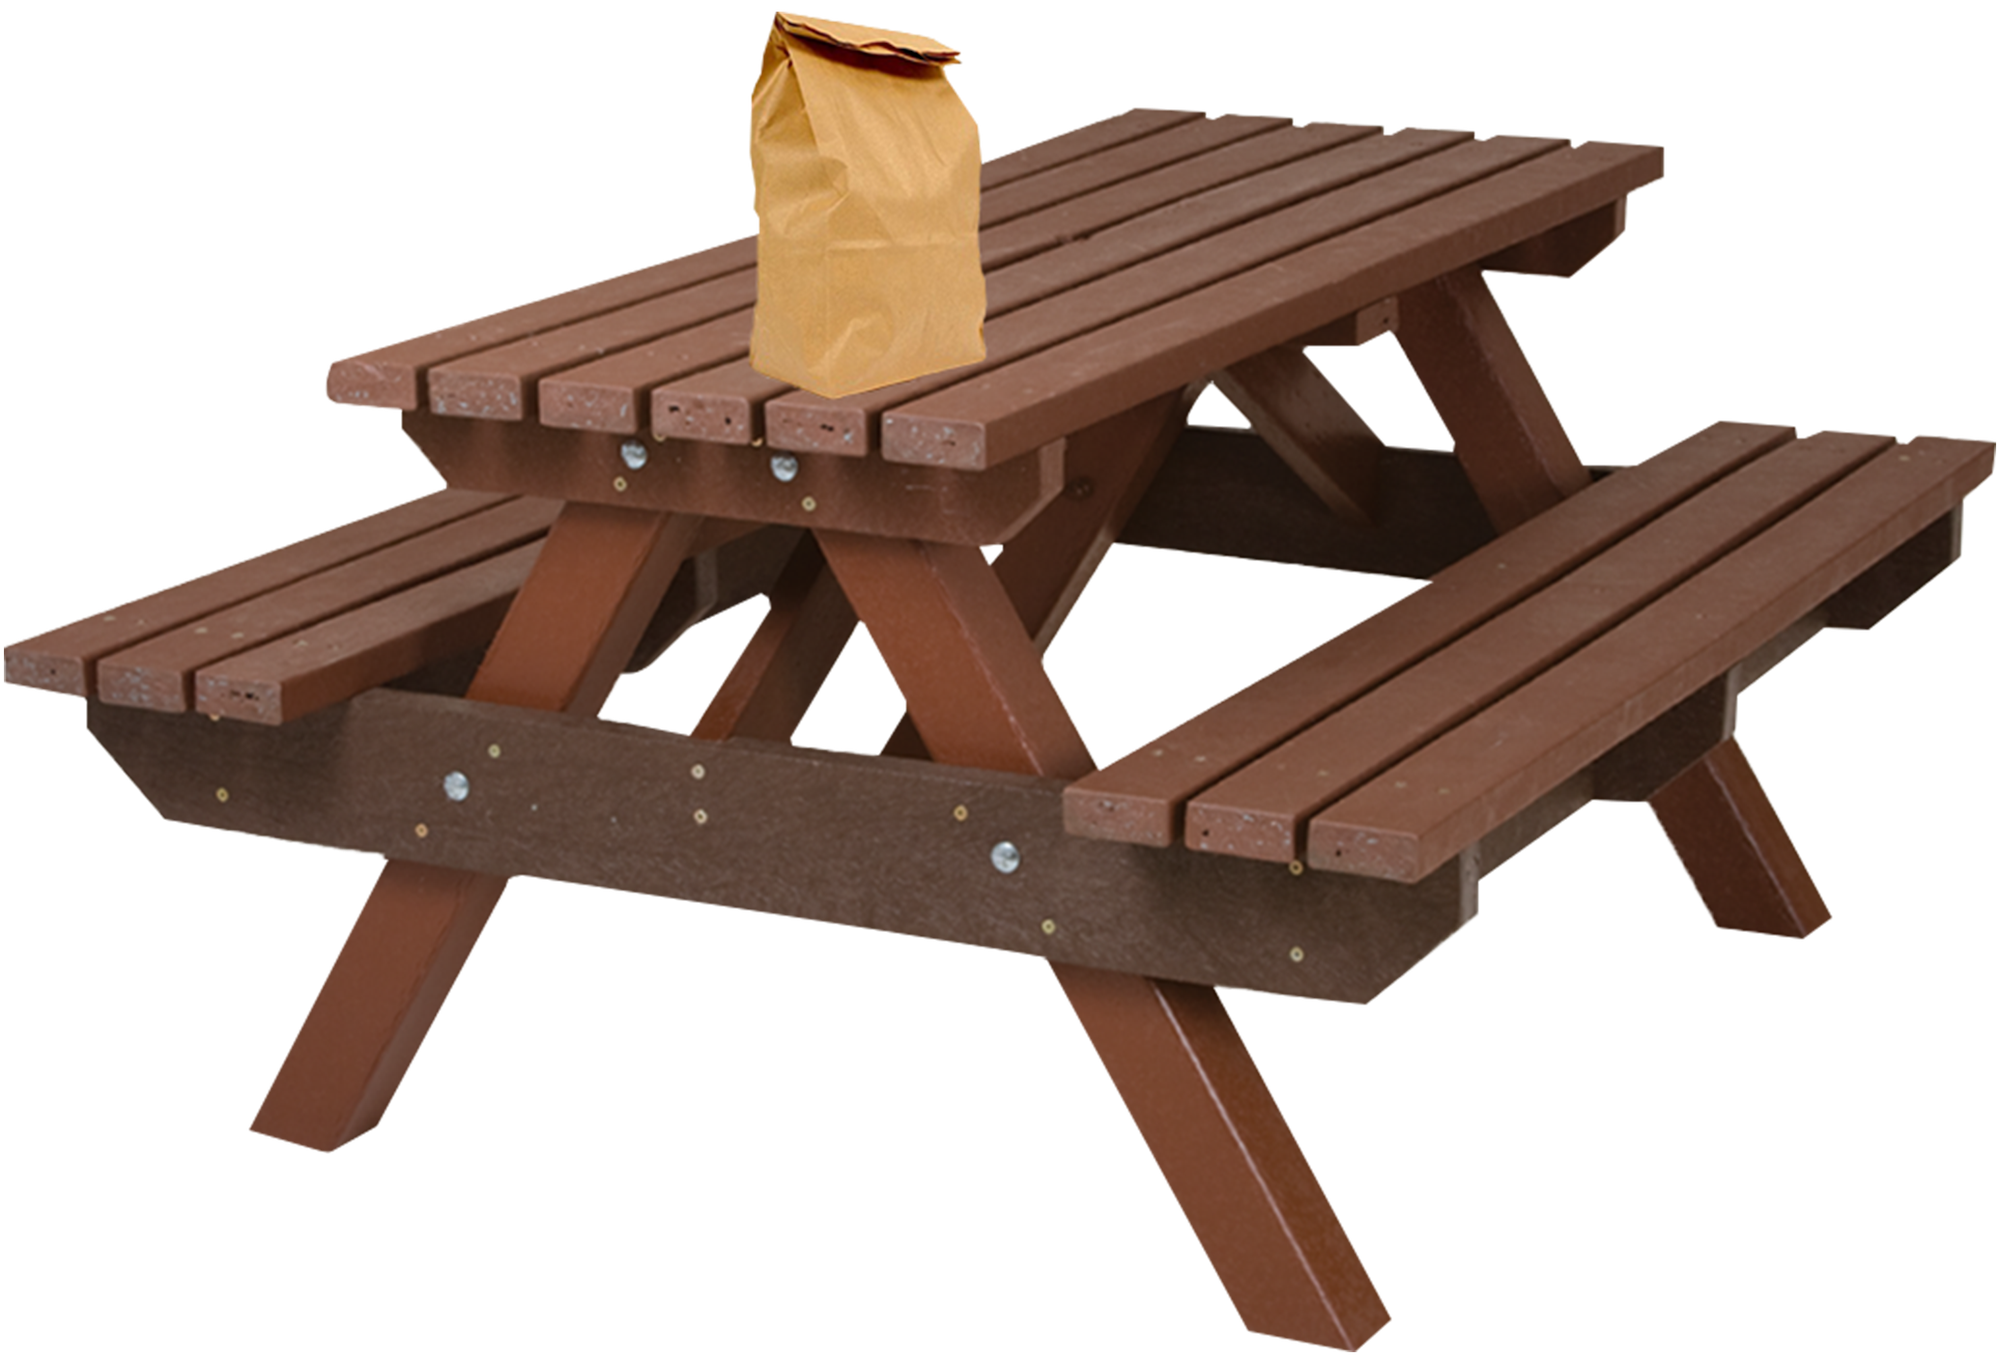 A stuffed brown paper bag sits on top of a chocolate colored picnic bench.